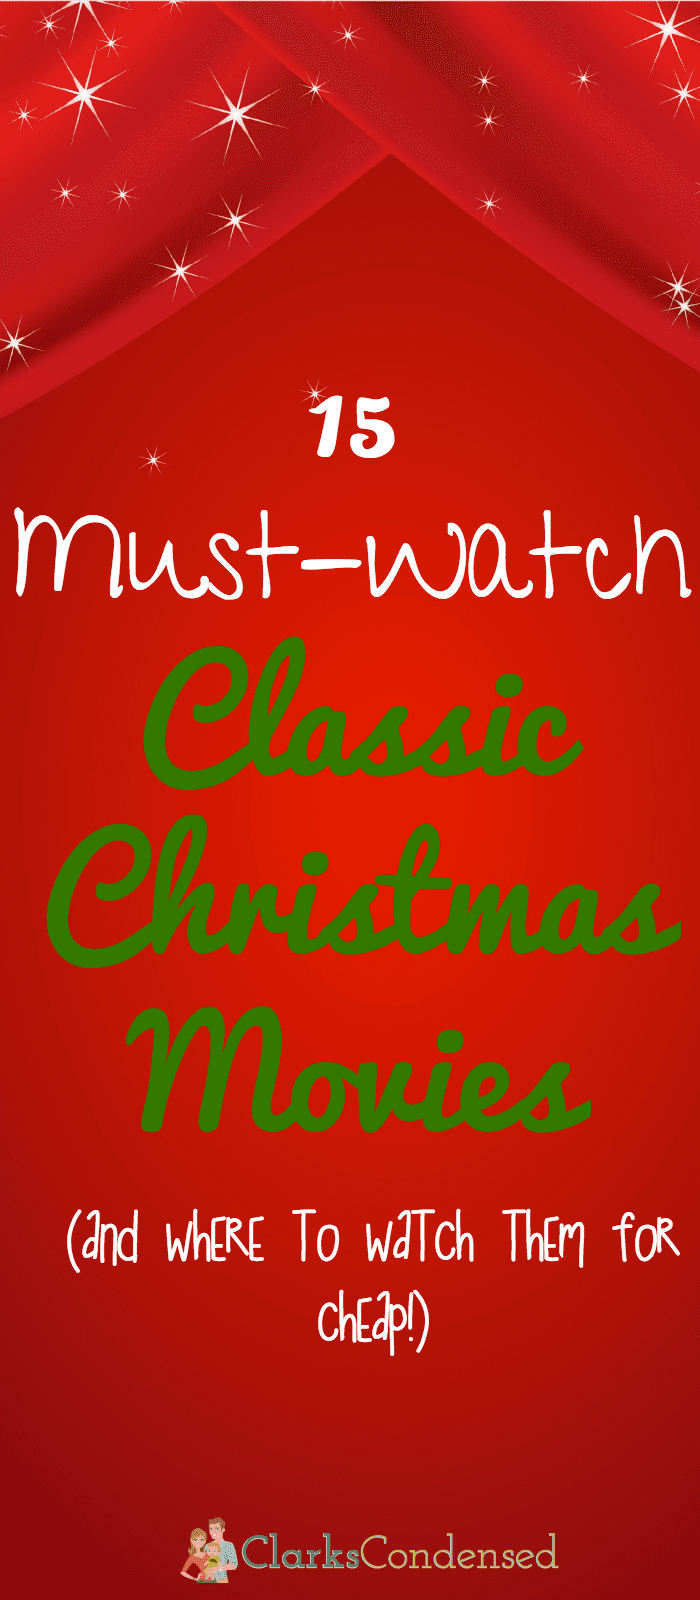 15 of our favorite classic Christmas movies that we watch every year - and where to watch them for cheap!